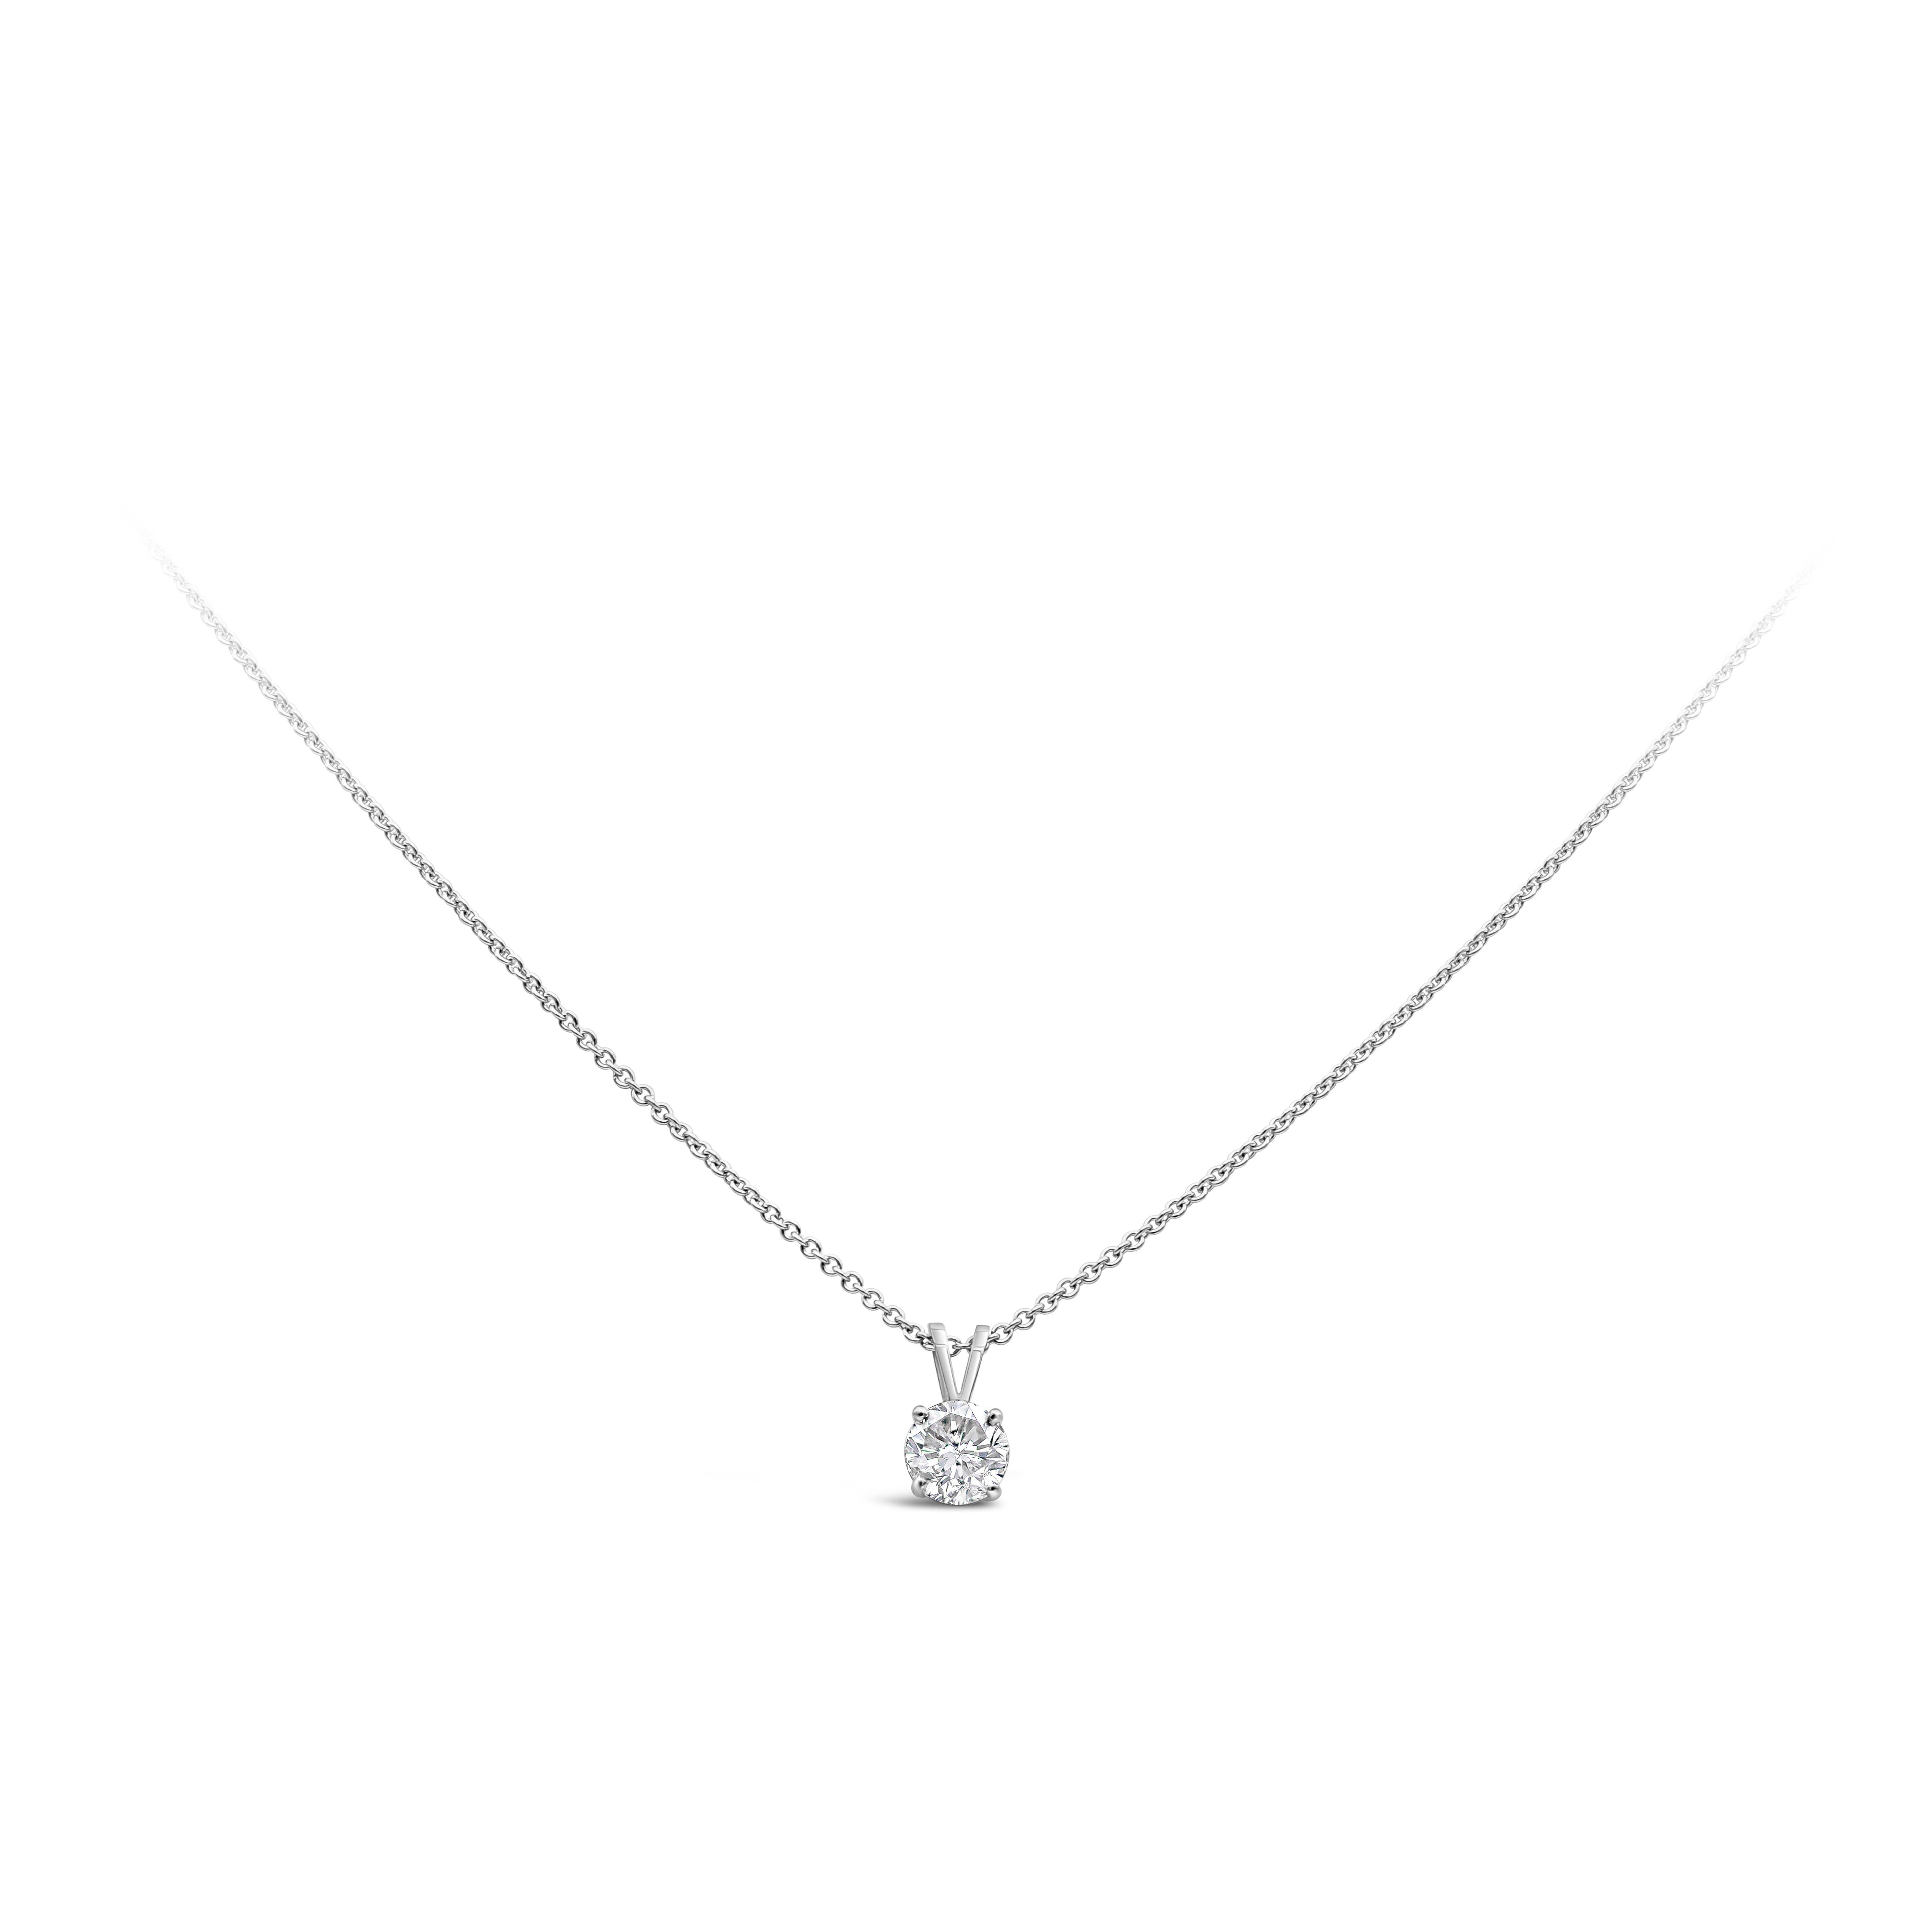 This simple and timeless pendant necklace showcases one brilliant round cut diamond weighing 1.00 carats, F color and SI3/I1 clarity. Mounted in a beautiful four prong setting. Made in 14 karat and 18 karat white gold. 

Roman Malakov is a custom